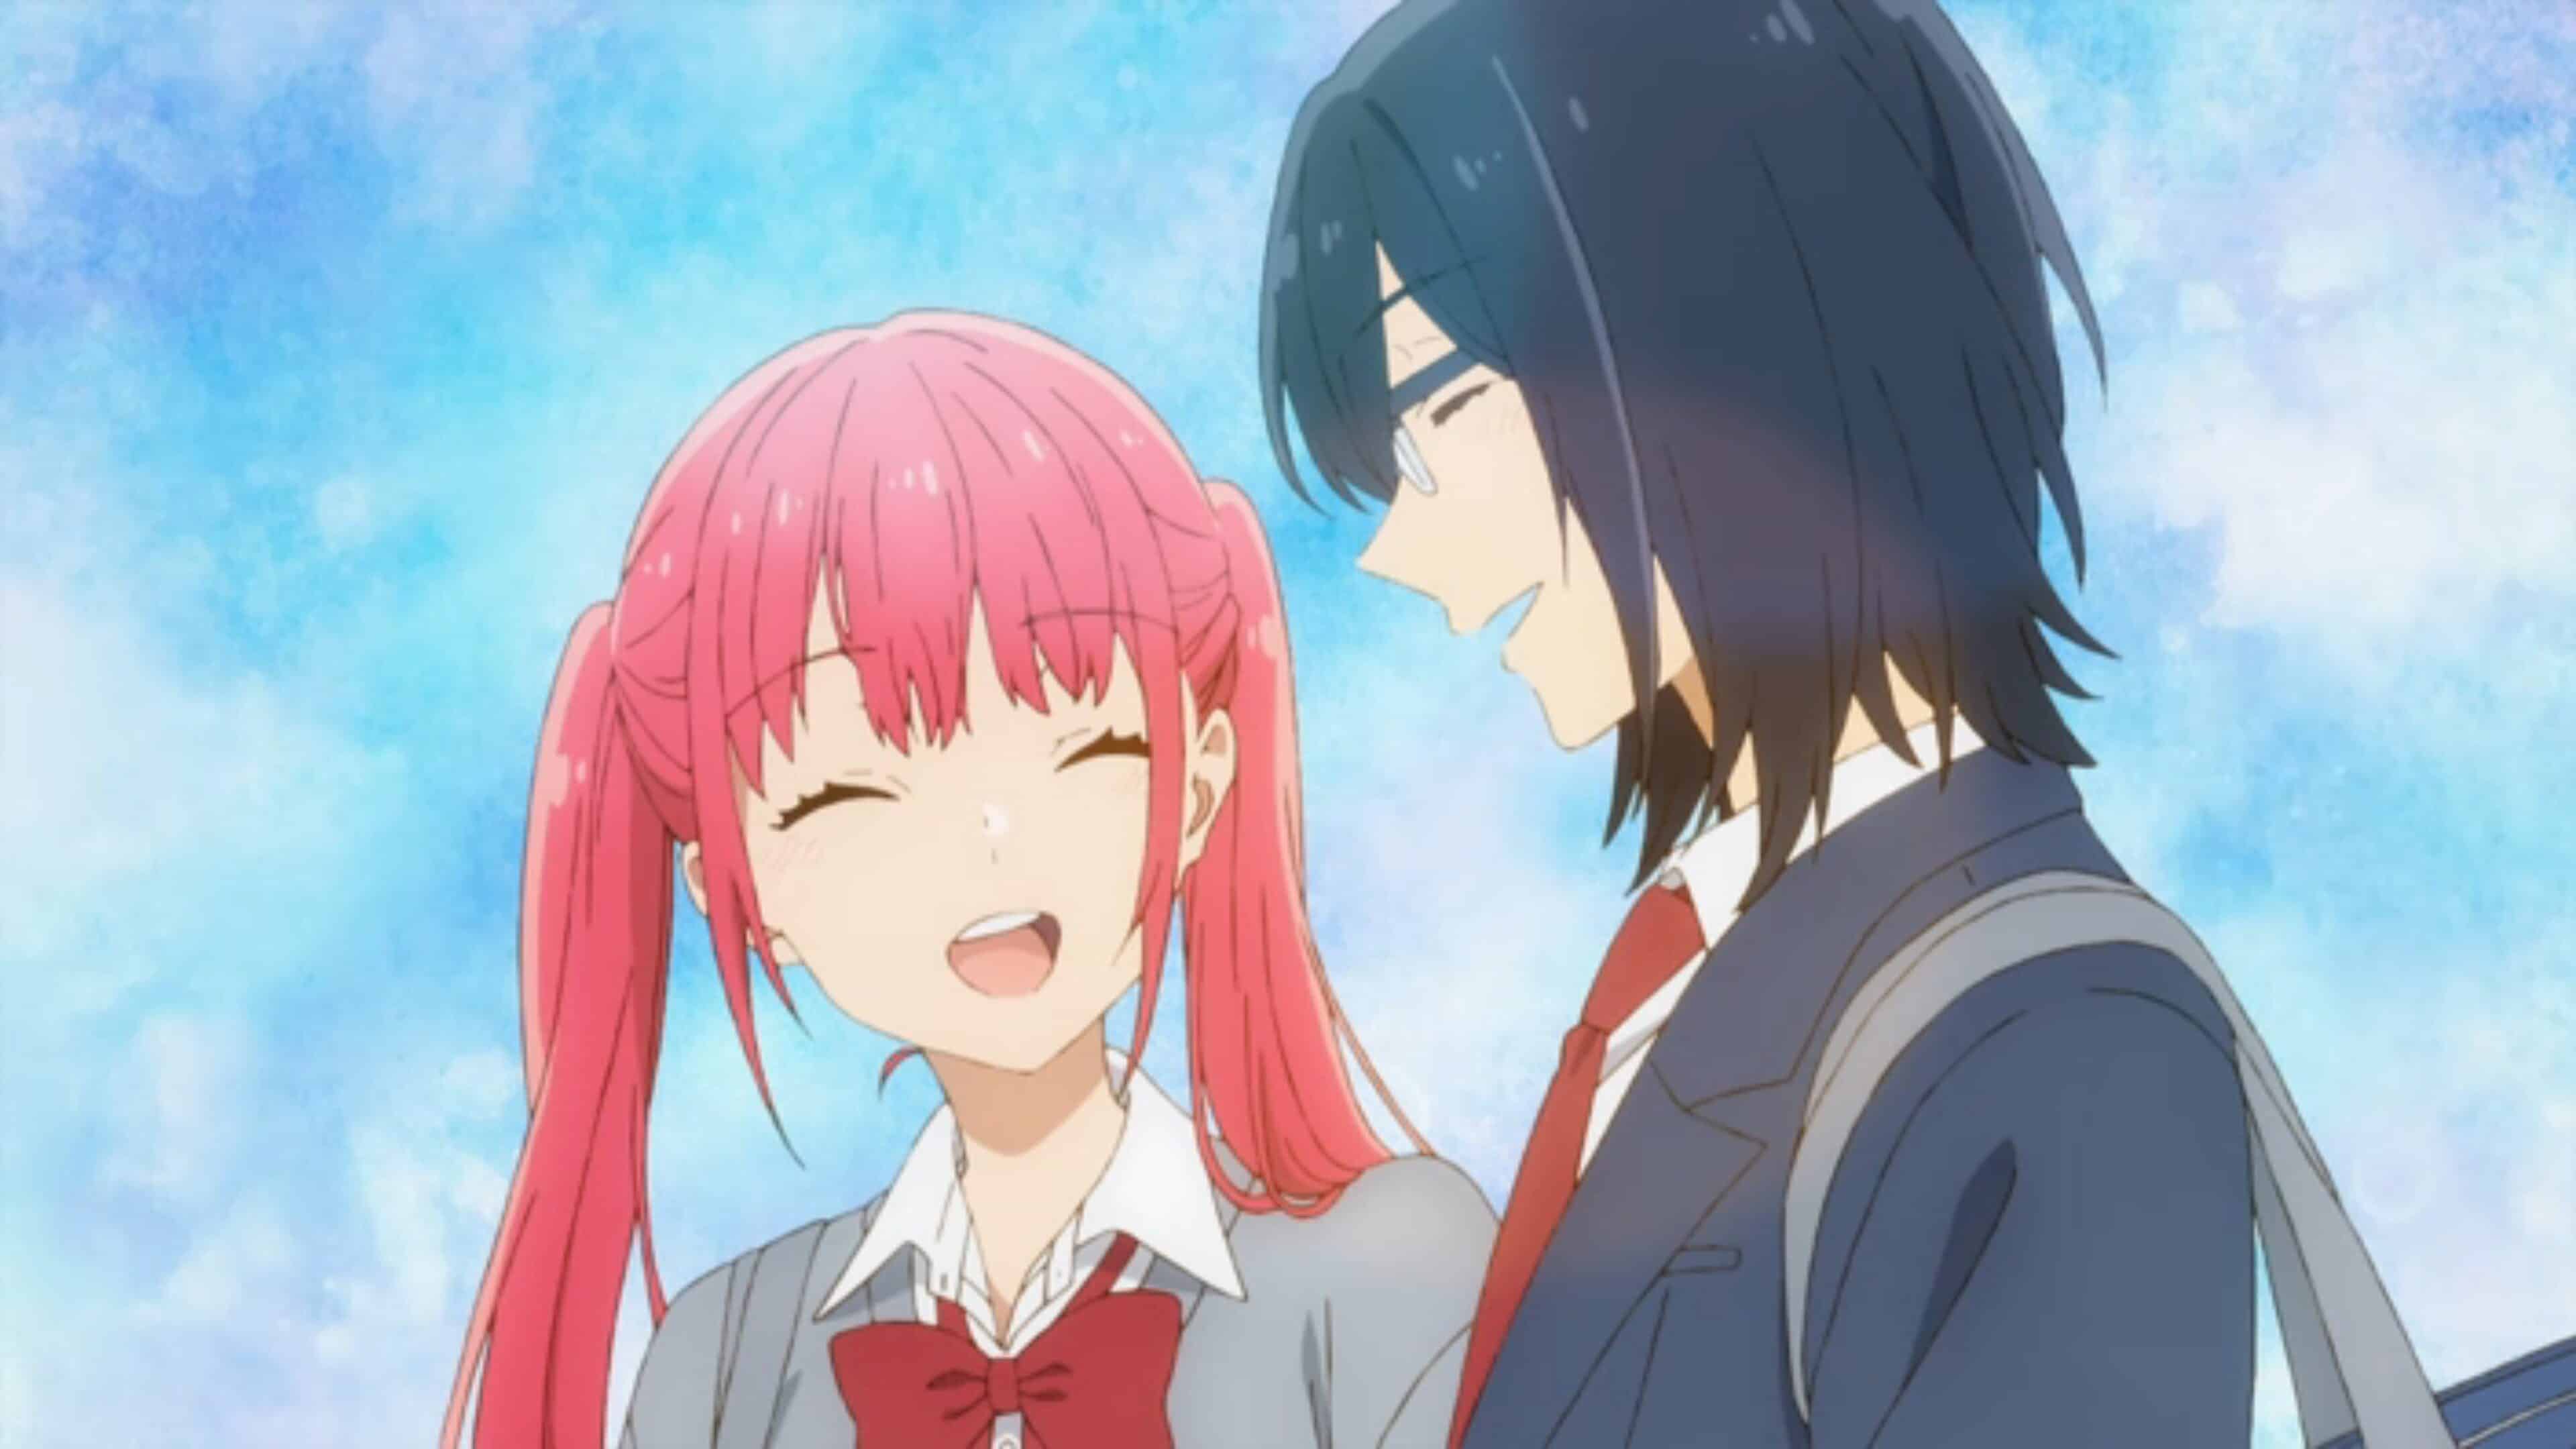 Remi and Miyamura laughing together